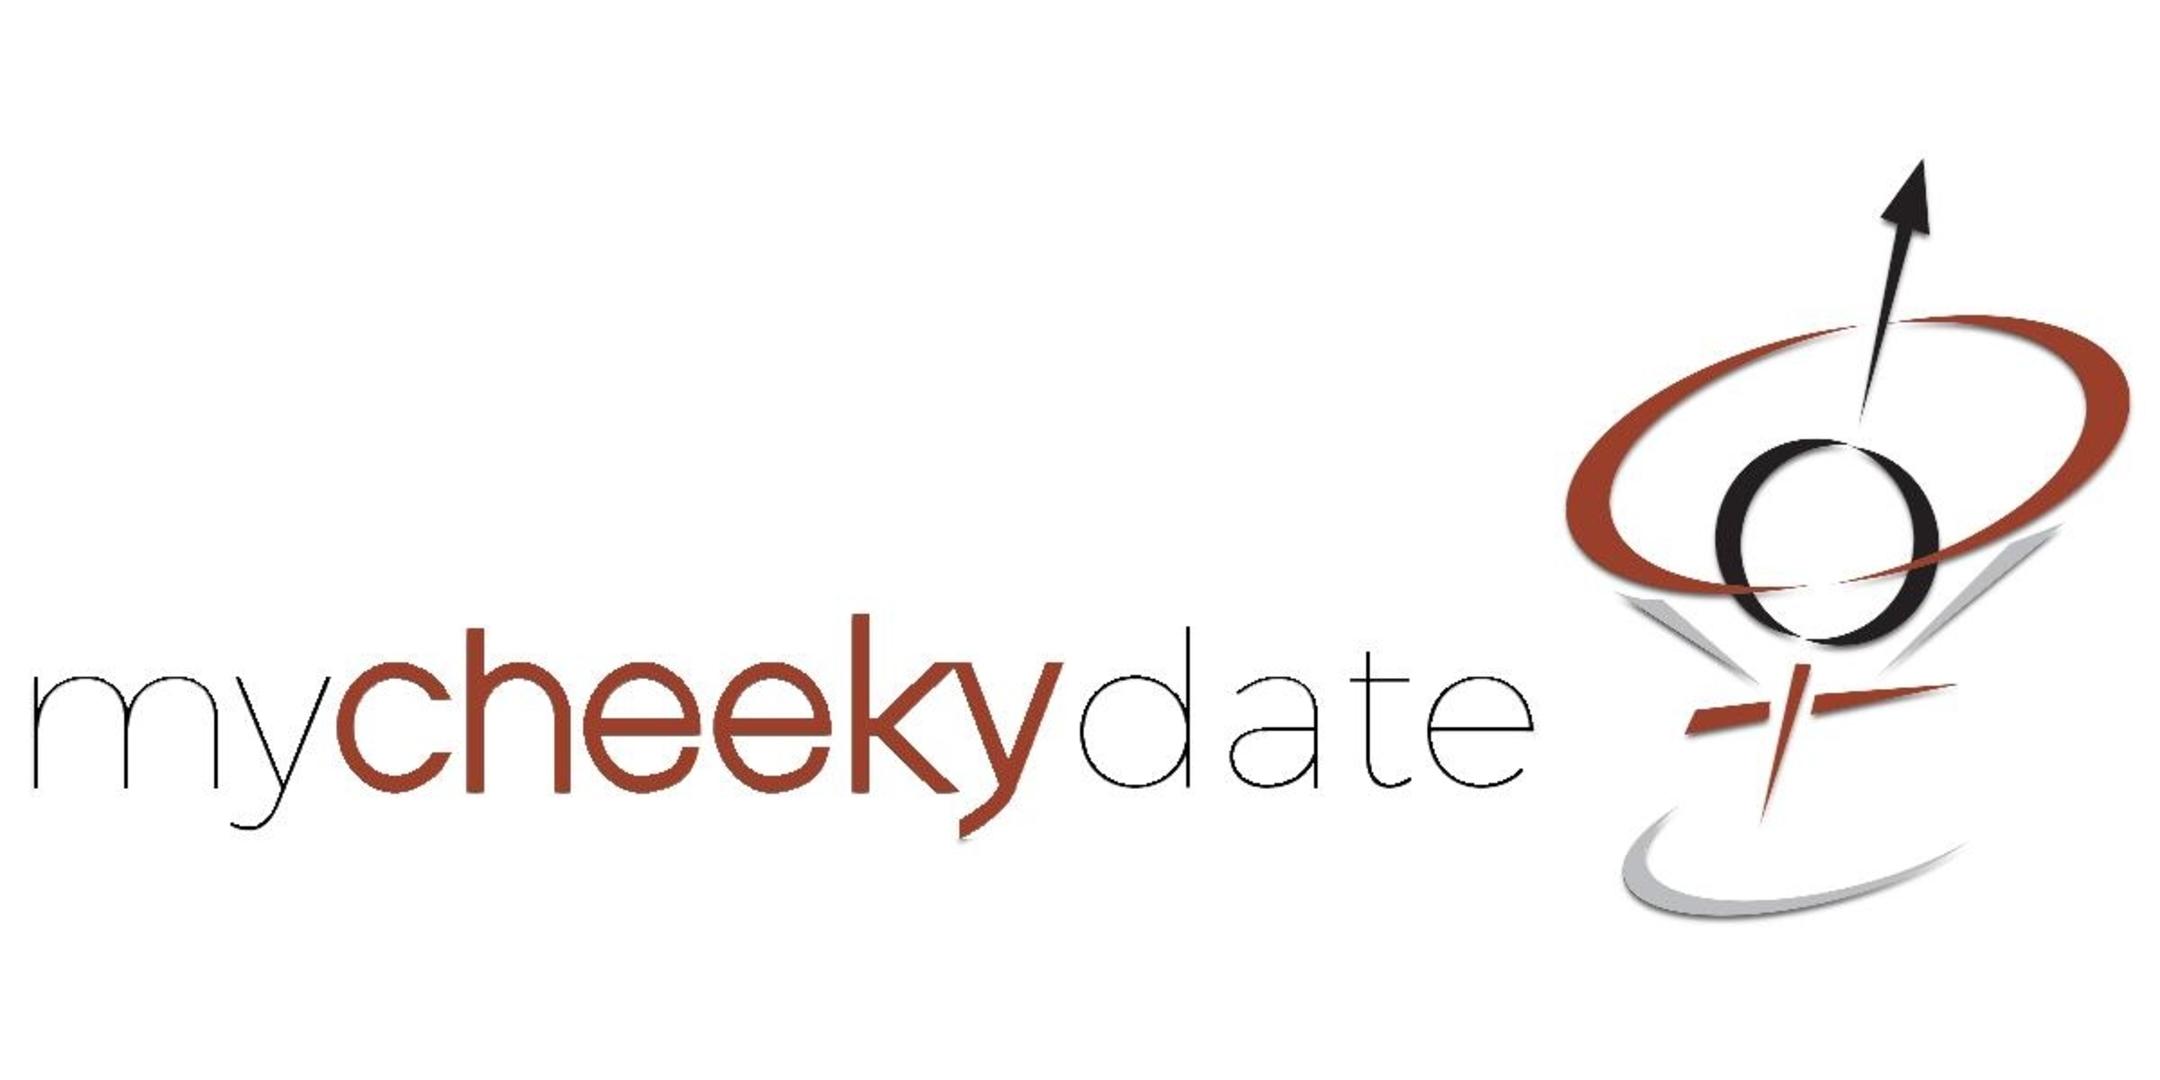 Speed Dating in Adelaide | Singles Event | Let's Get Cheeky!